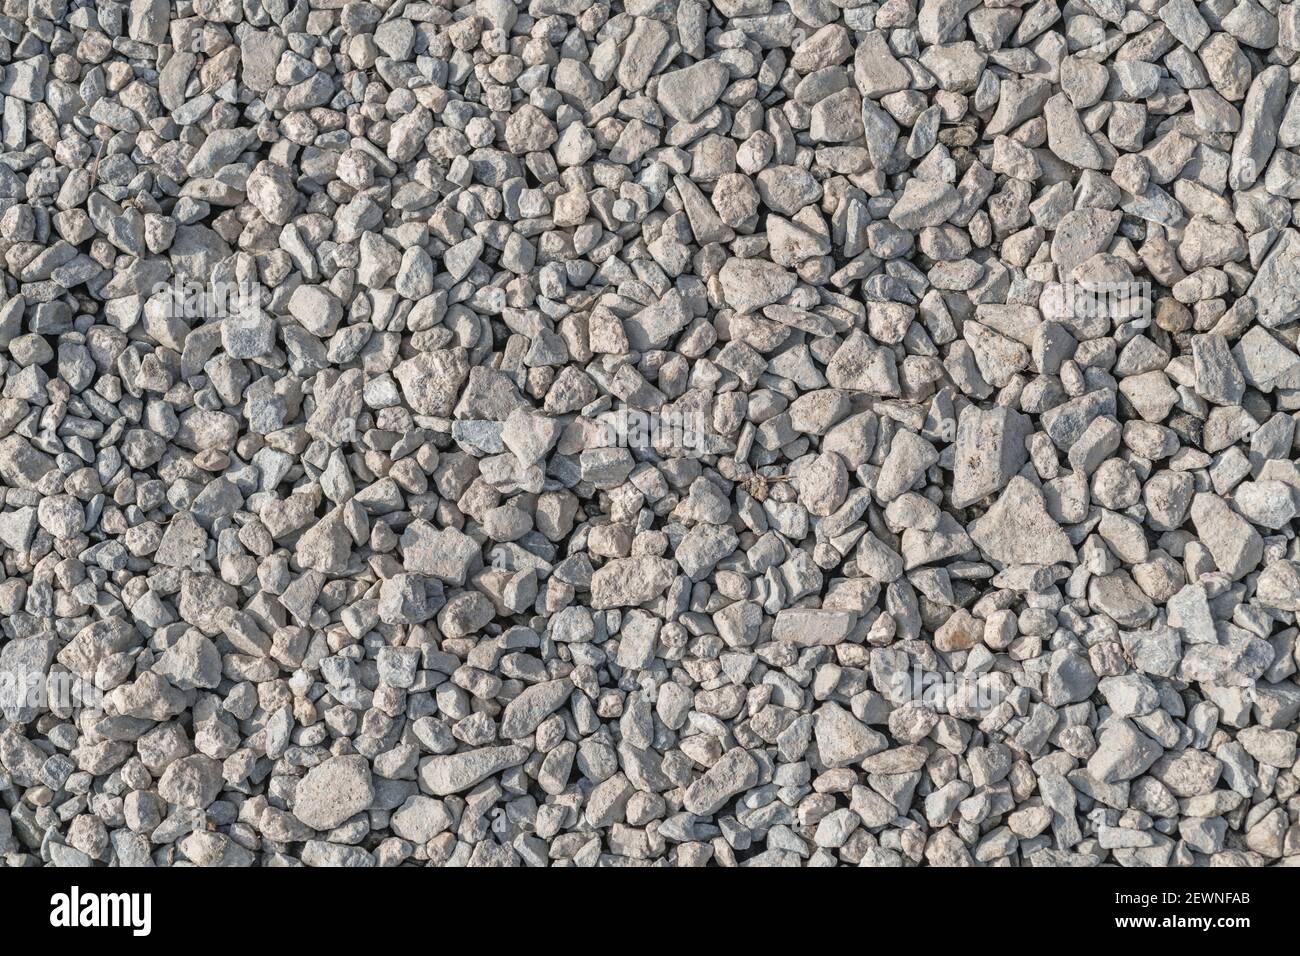 Compacted stone hardcore surface. For rough bumpy surface, fall on stony ground, broken, fragmented, gravel path, leave no stone unturned. Stock Photo